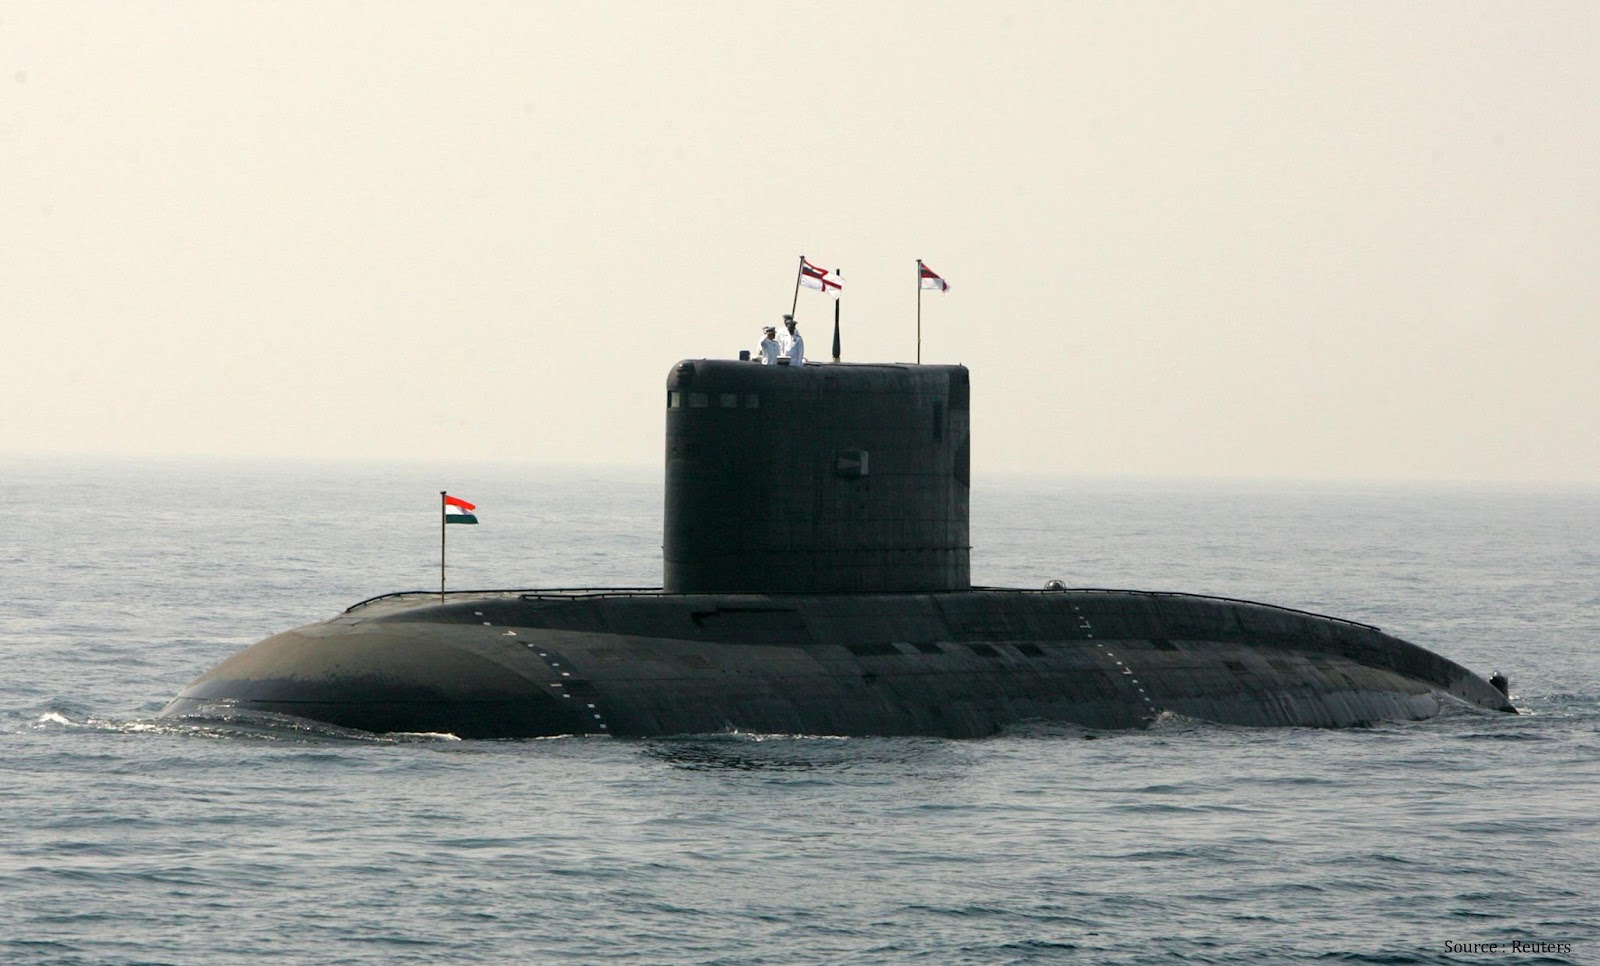 Blog 548: India's first nuclear submarine - the indigenous 6,000-ton